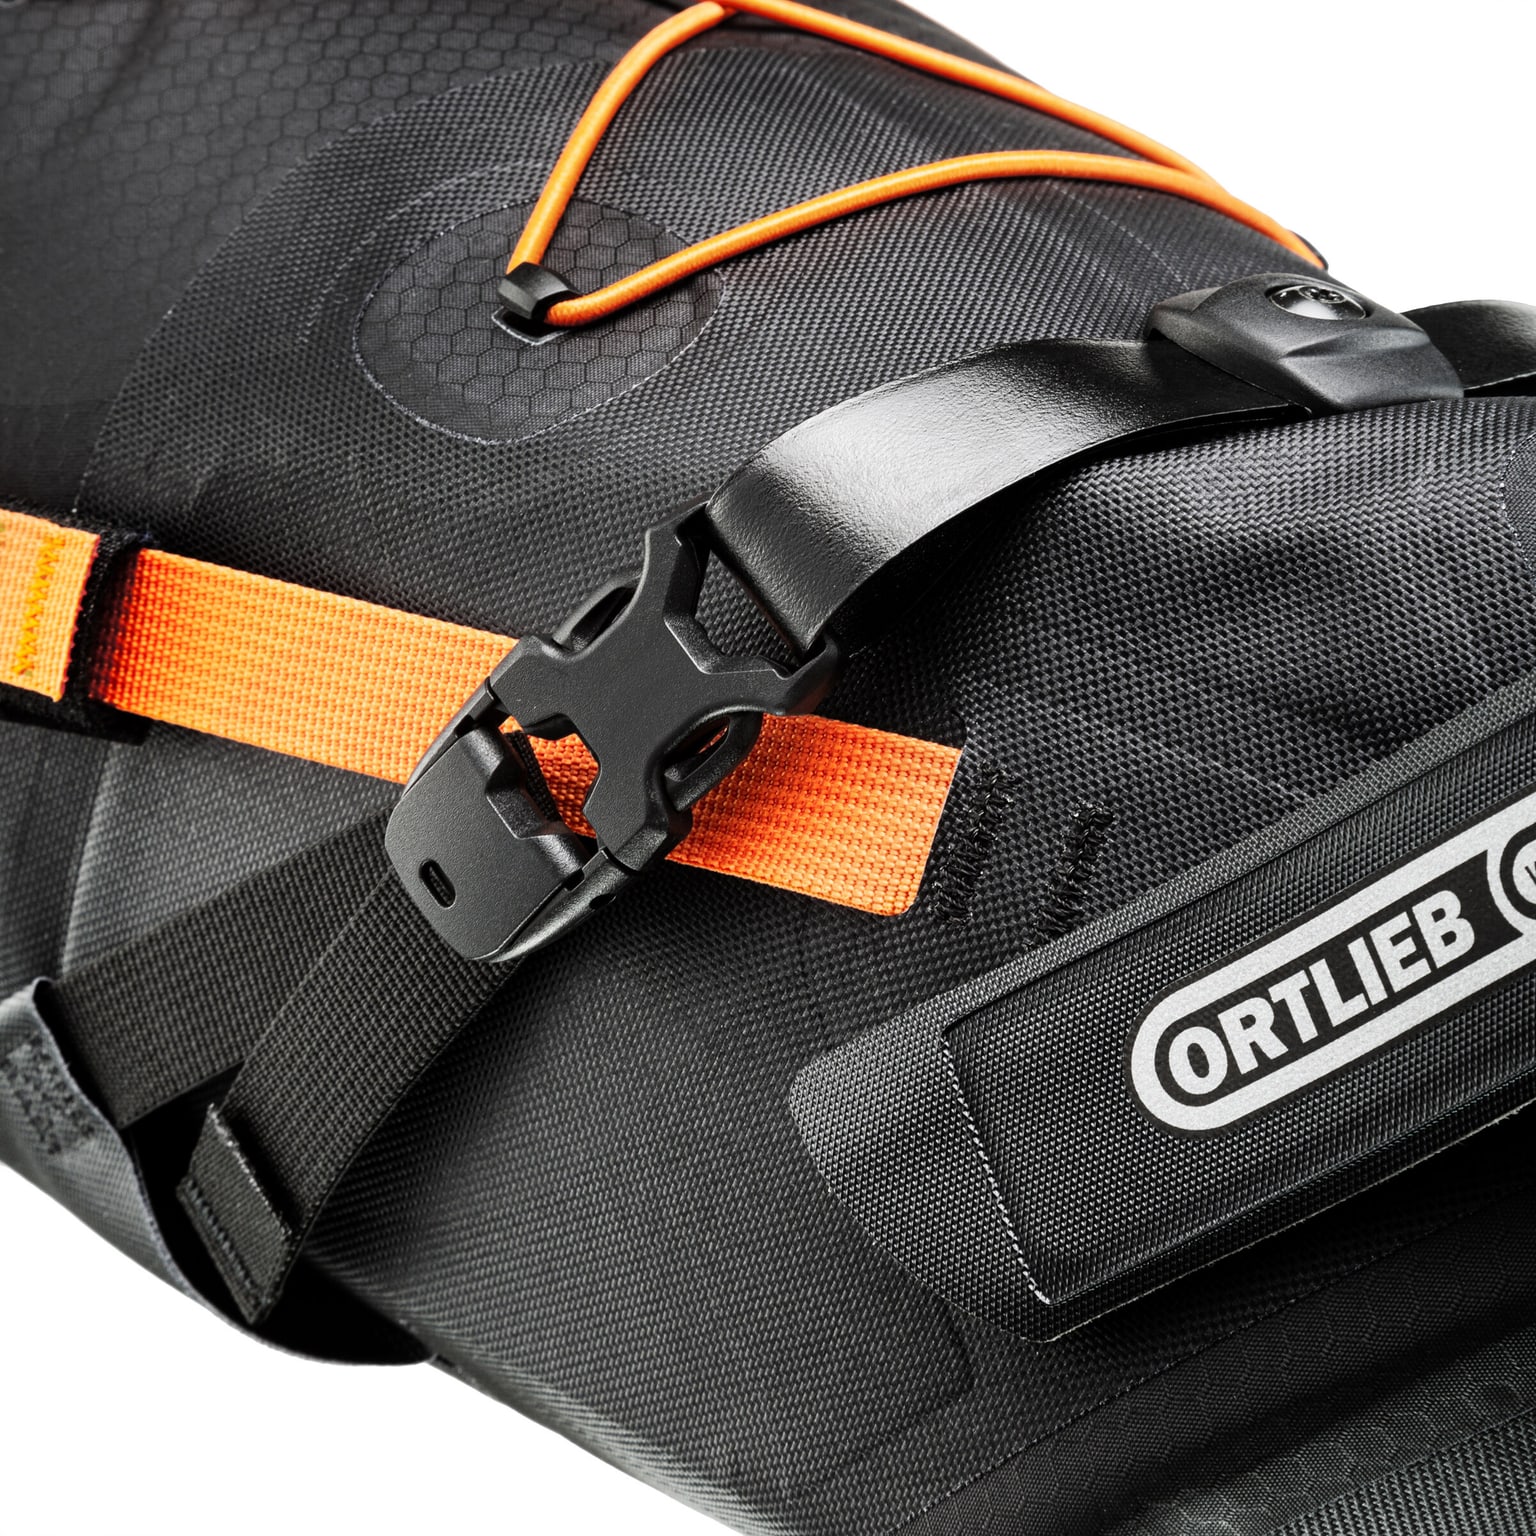 Ortlieb Ortlieb Seat Pack 11l Sacoche pour vélo 7